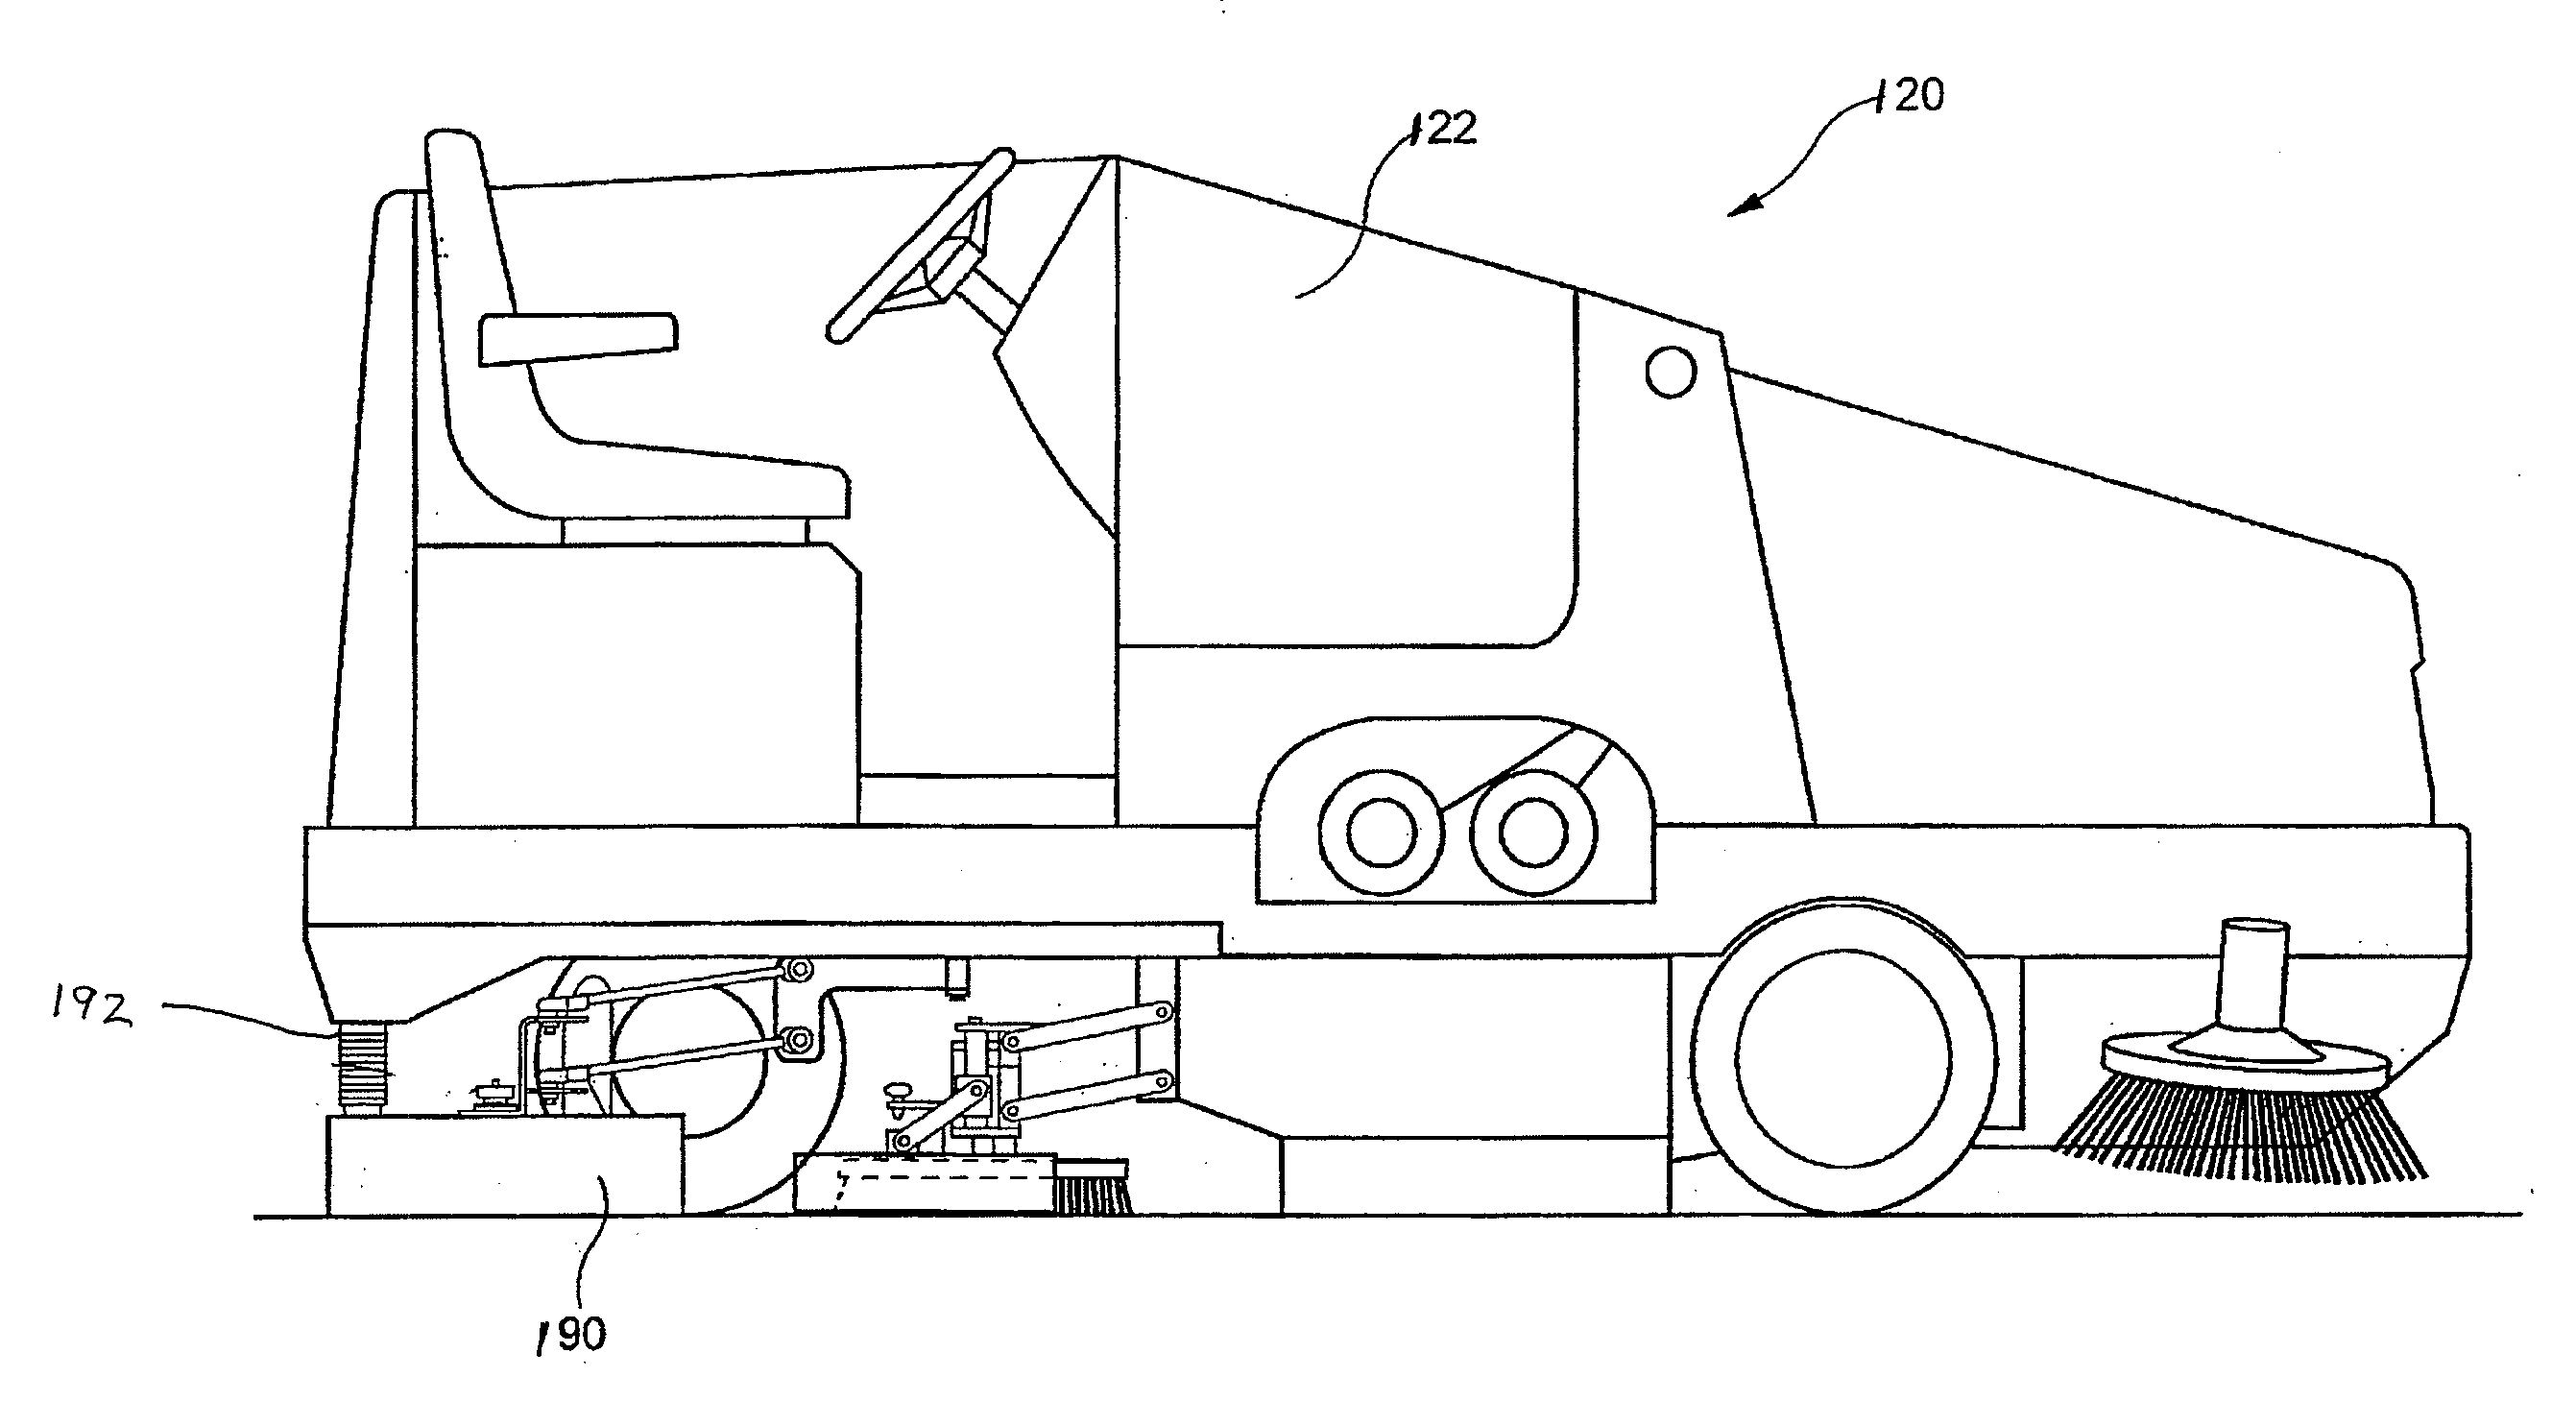 Integrated Vacuum Wand and Method of Use